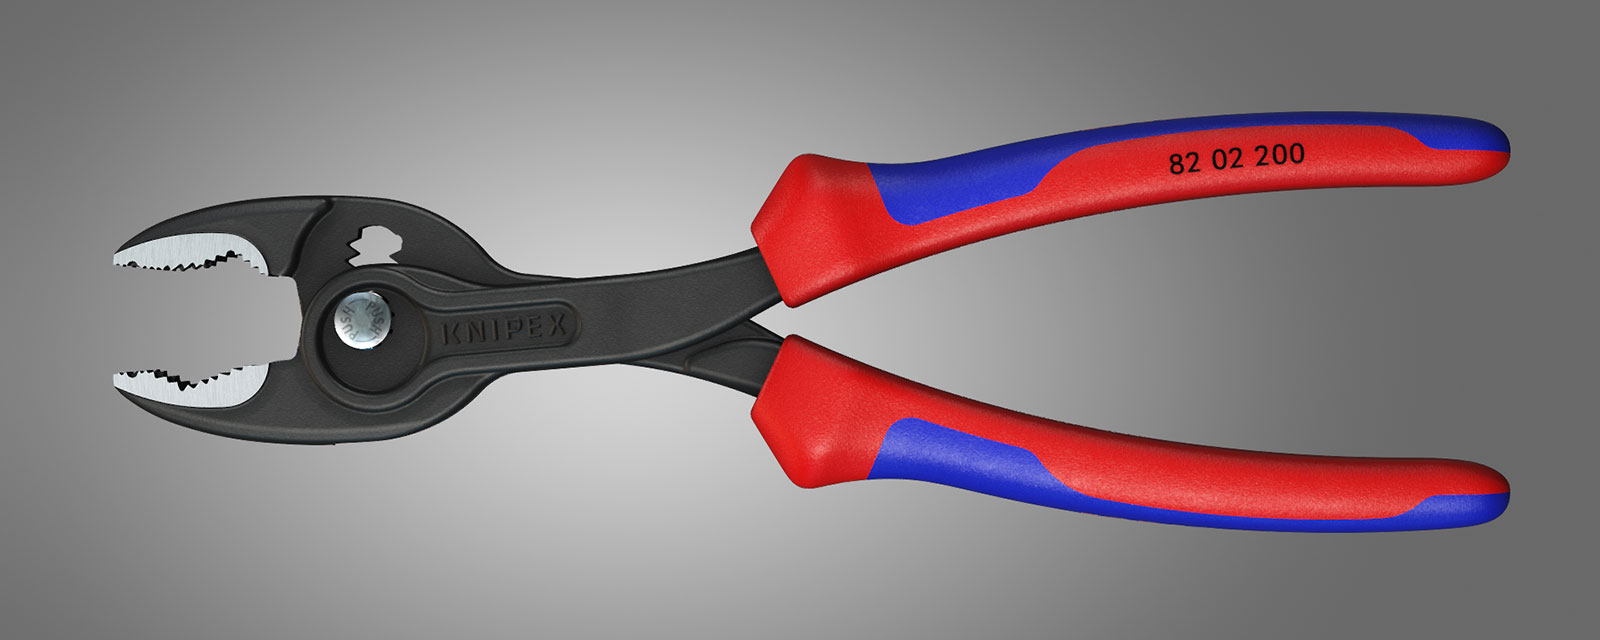 PINCE A GRATTER VERNIS ISOLANT 120mm KNIPEX